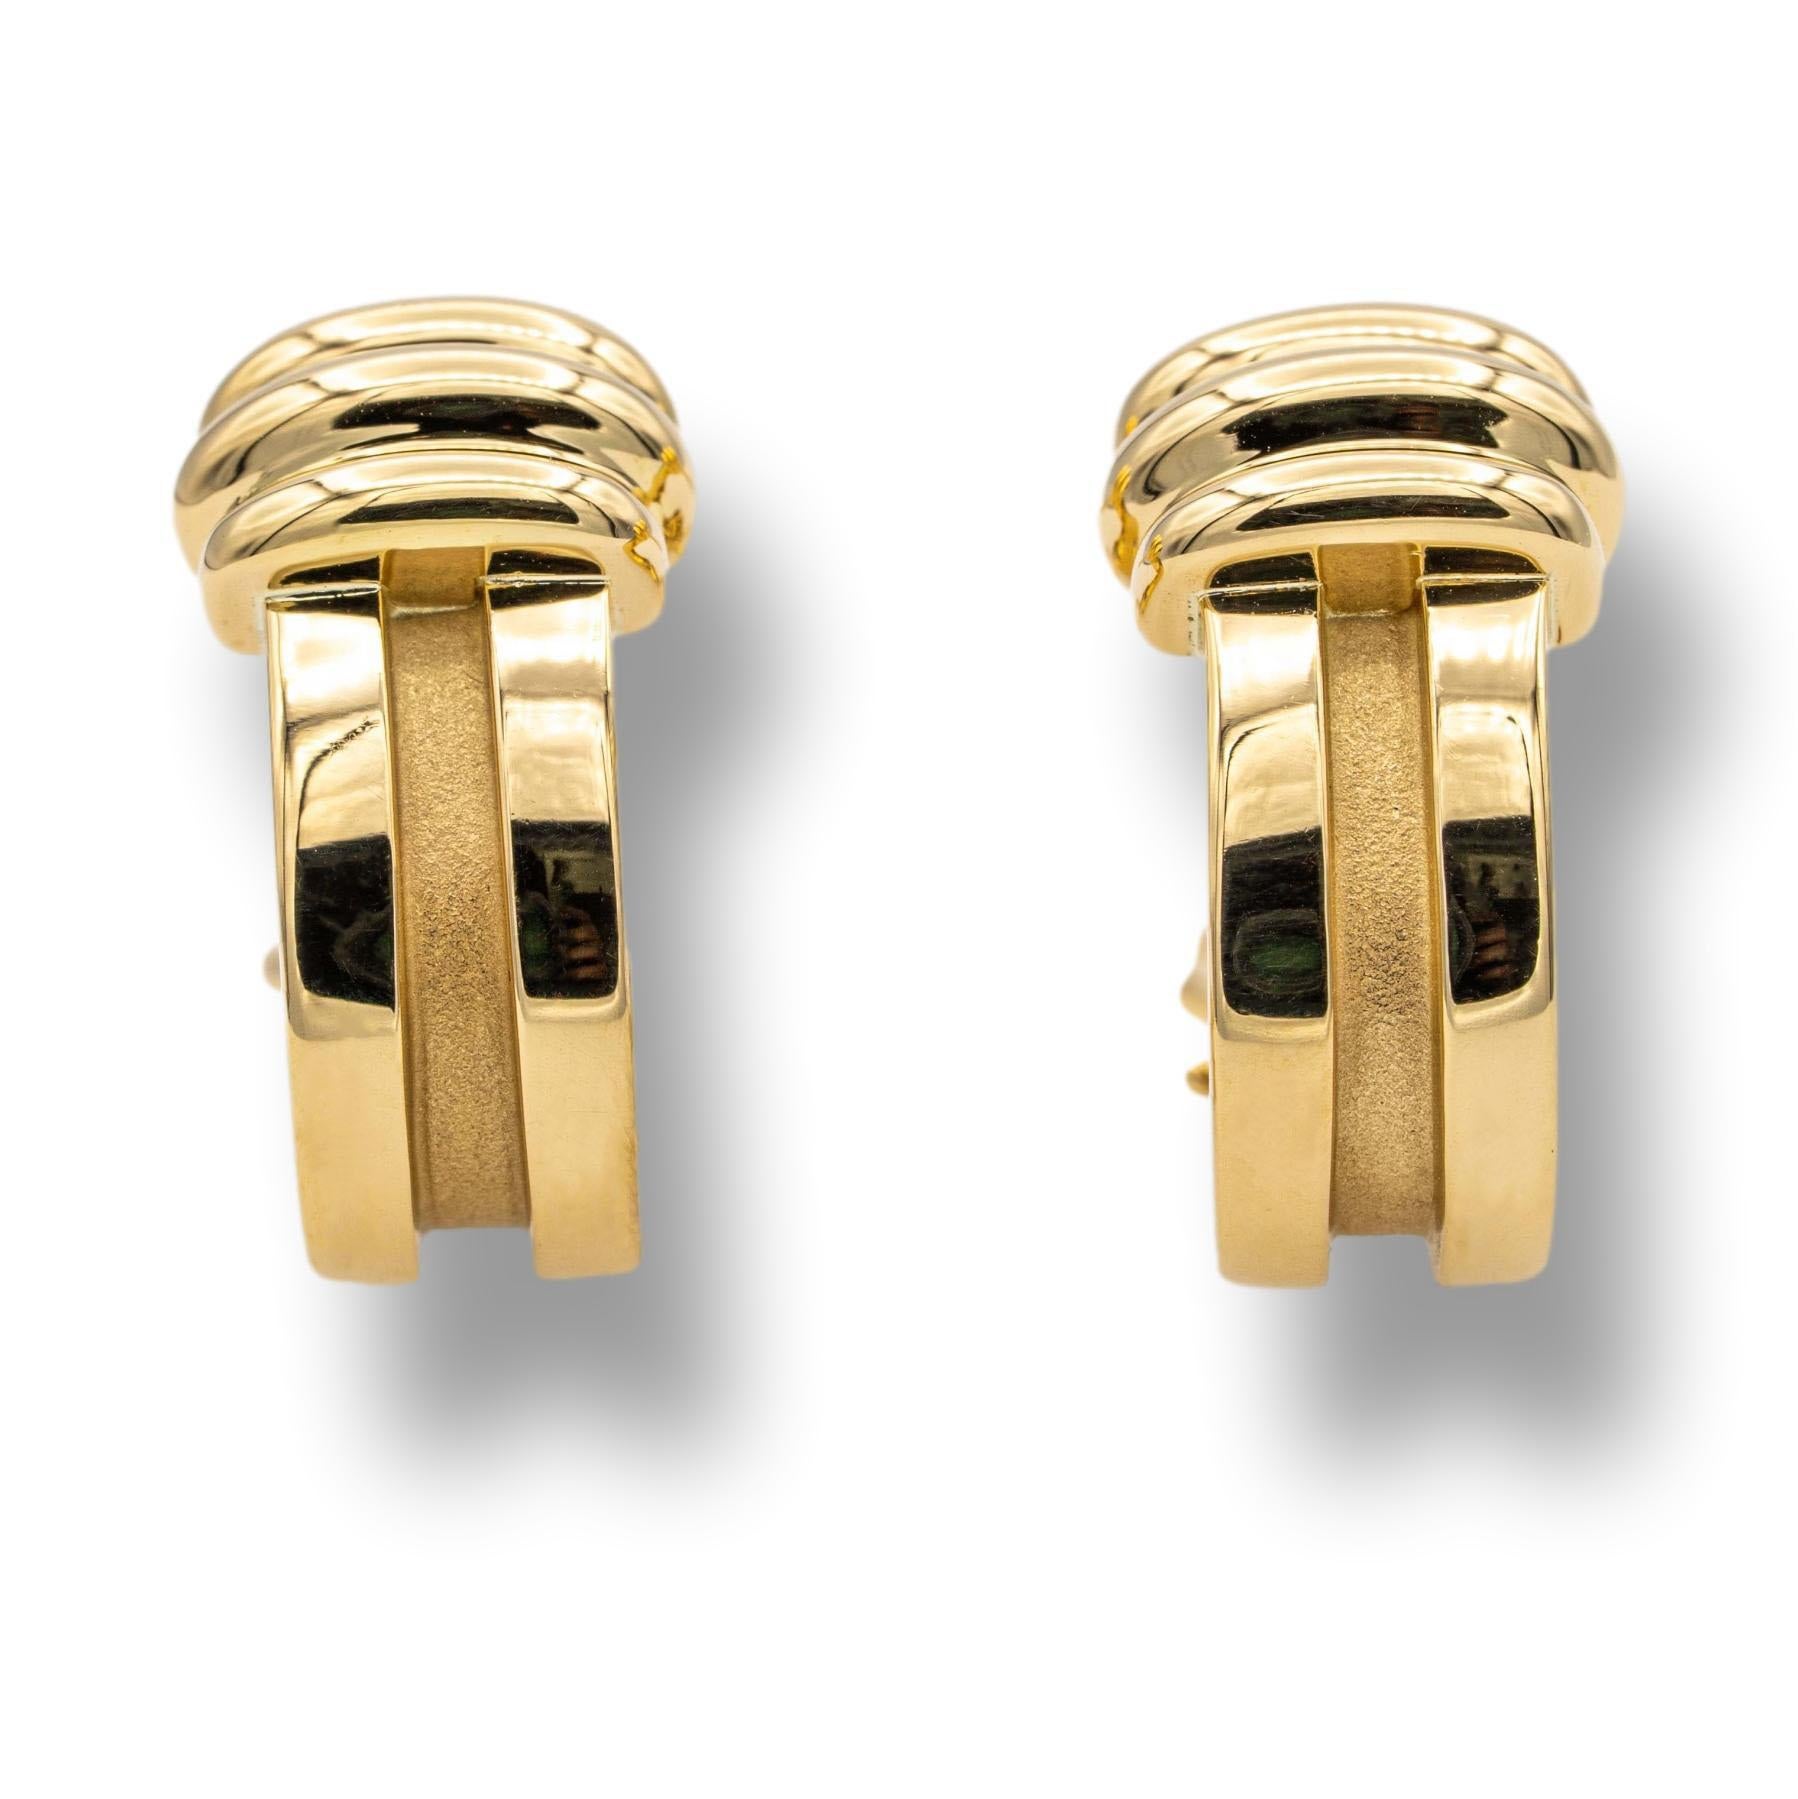 Vintage Tiffany & Co. Atlas Groove range Half-Hoop Earrings finely crafted in 18 karat yellow gold with large omega clip backs and posts. Circa 1995

Stamp: Tiffany & Co.  ©1995 750

Weight: 10 grams

Measurements: 0.75